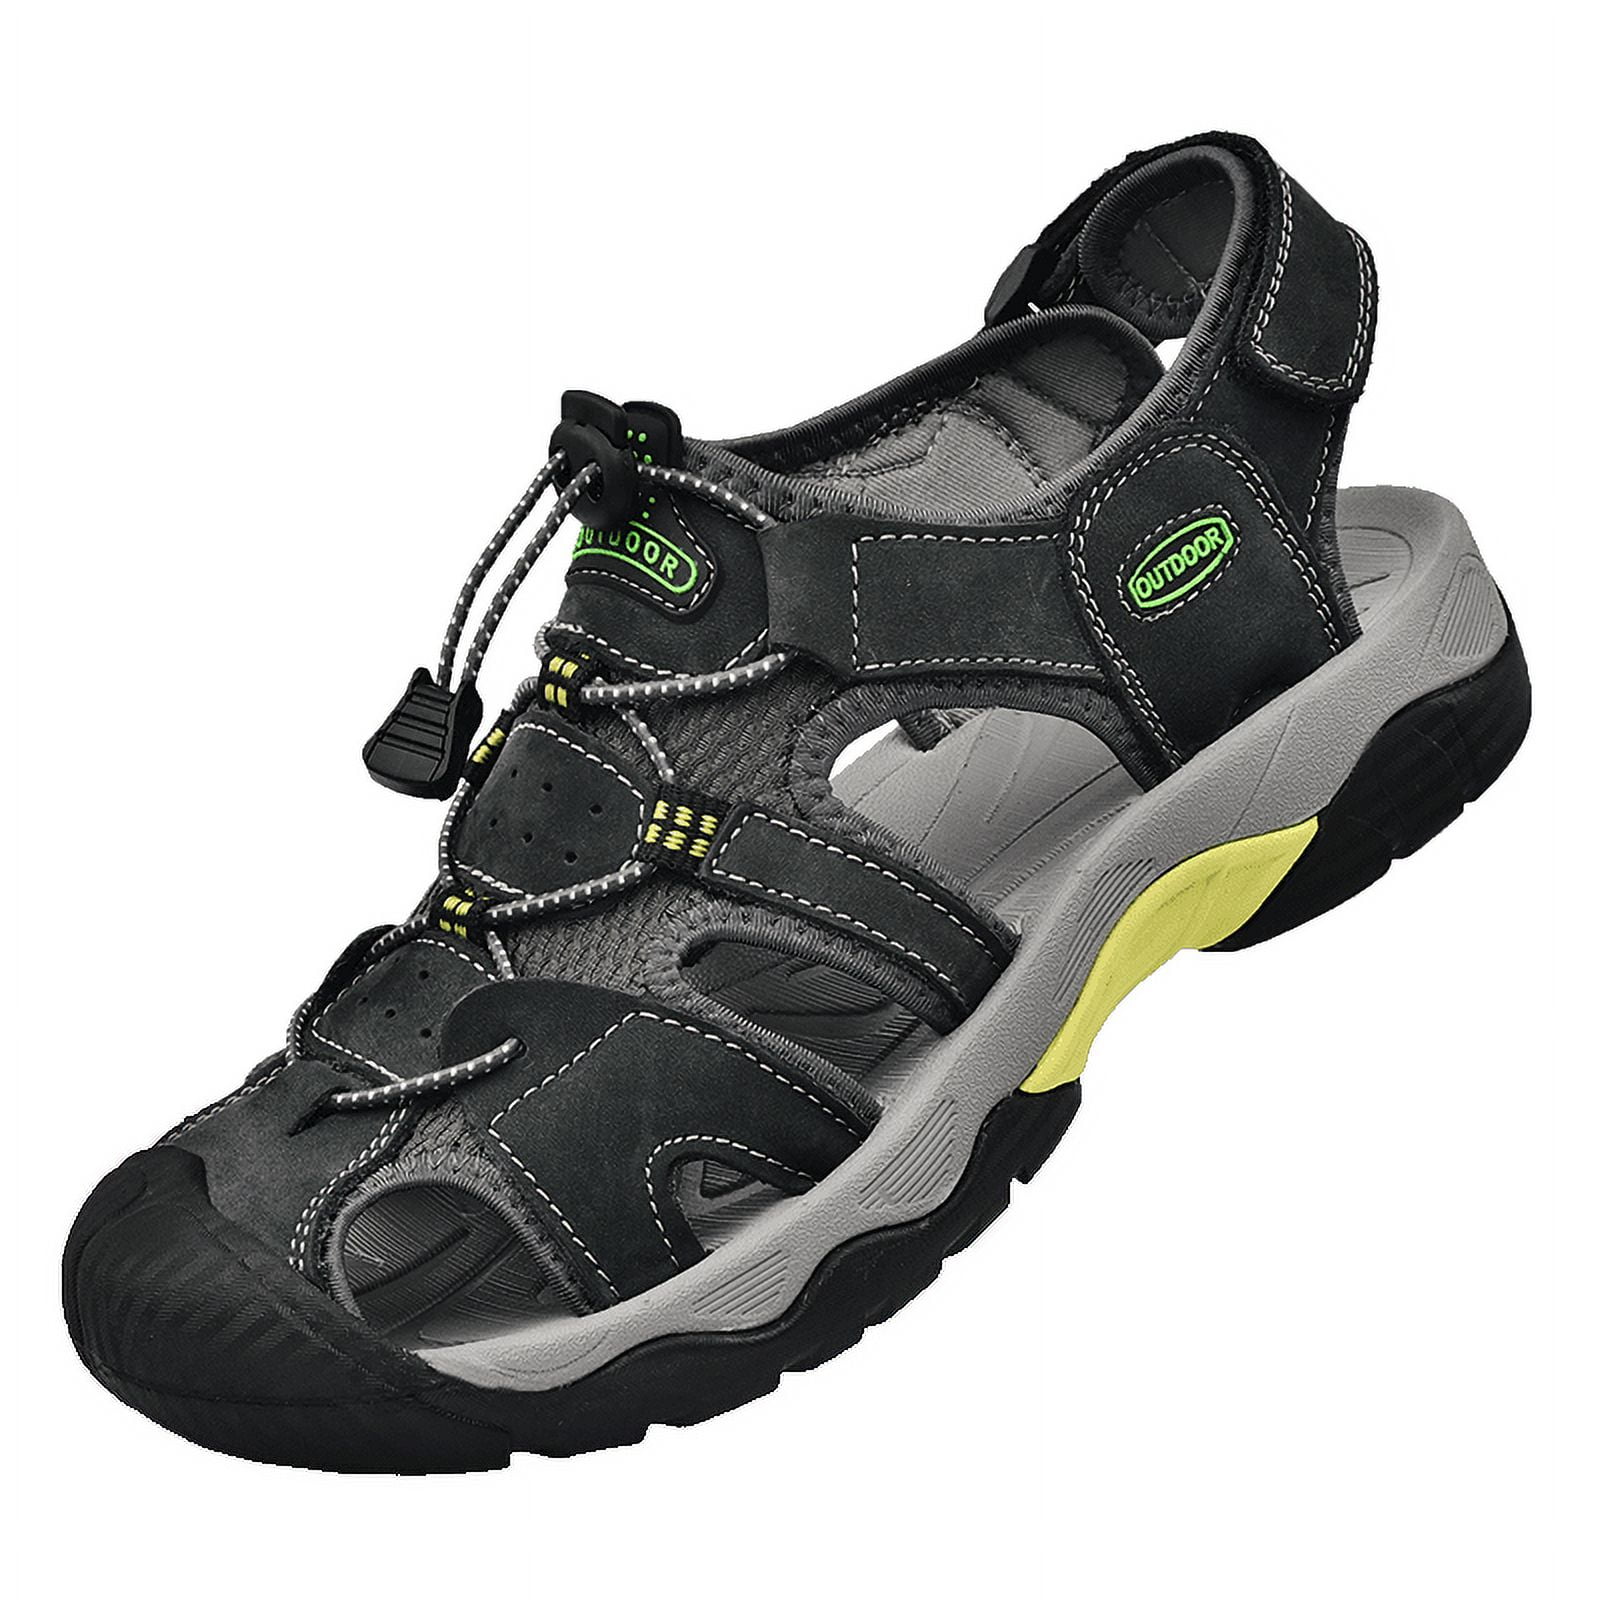 Men's Sandals, Spring And Summer Durable Non Slip Outdoor Hiking ...